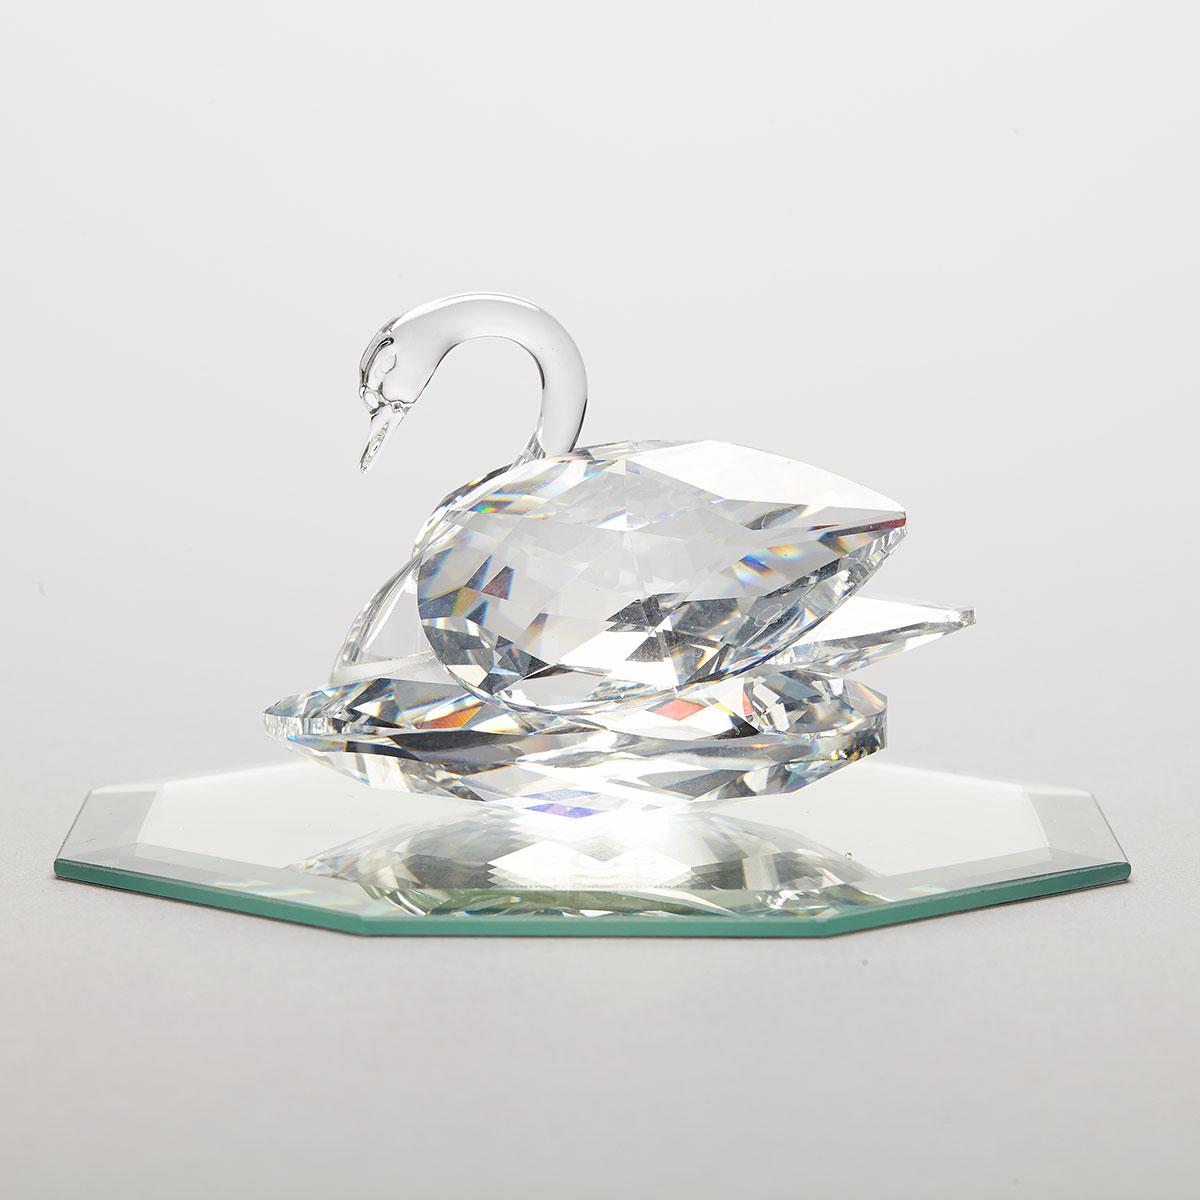 Seven Swarovski Crystal Swans, late 20th/early 21st century